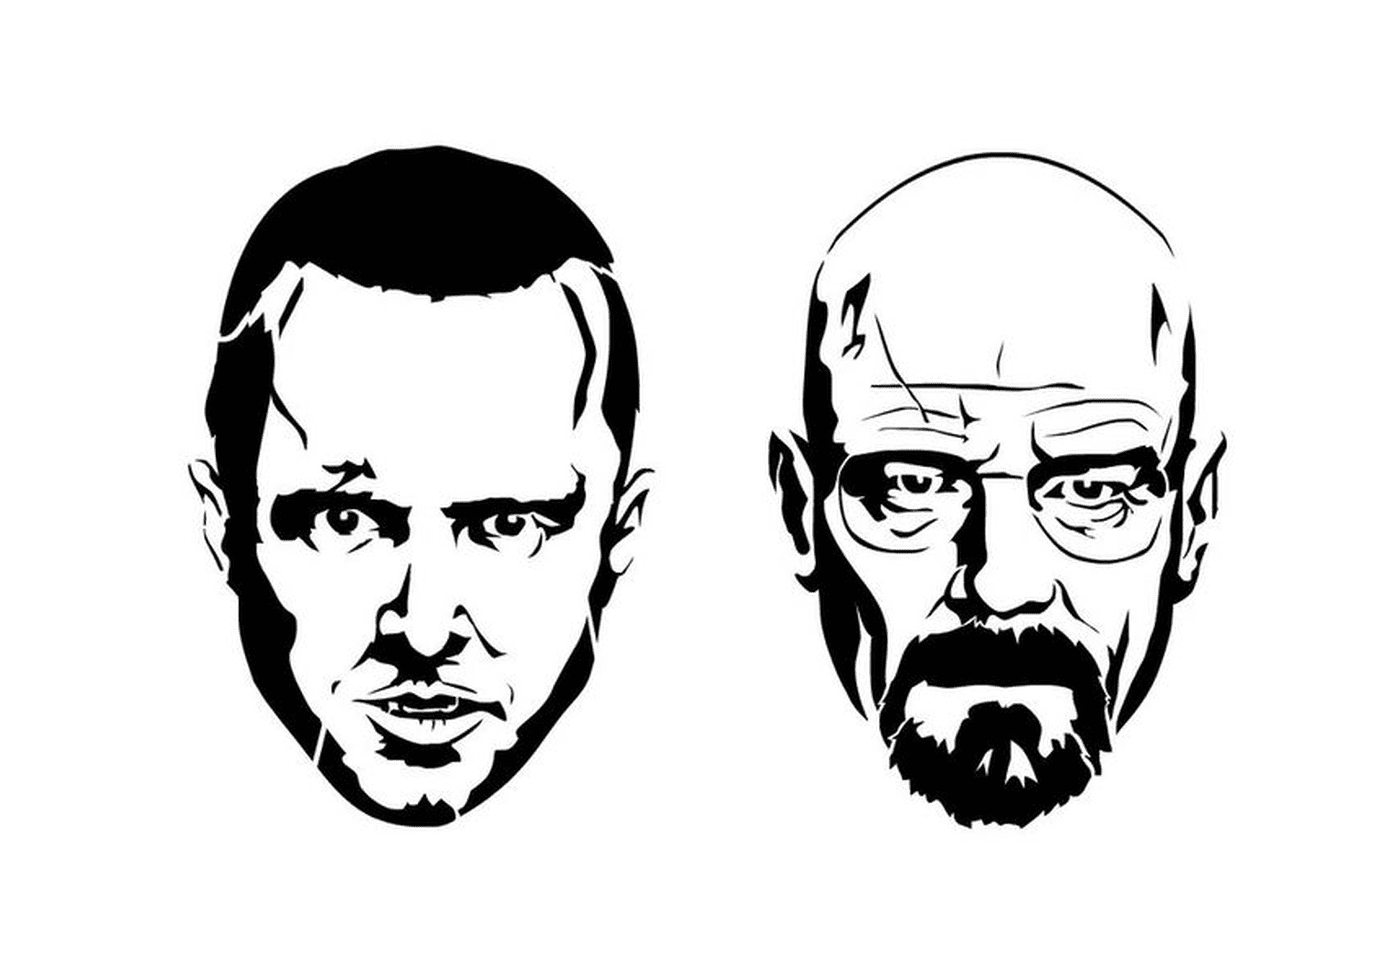 jesse and white from the breaking bad